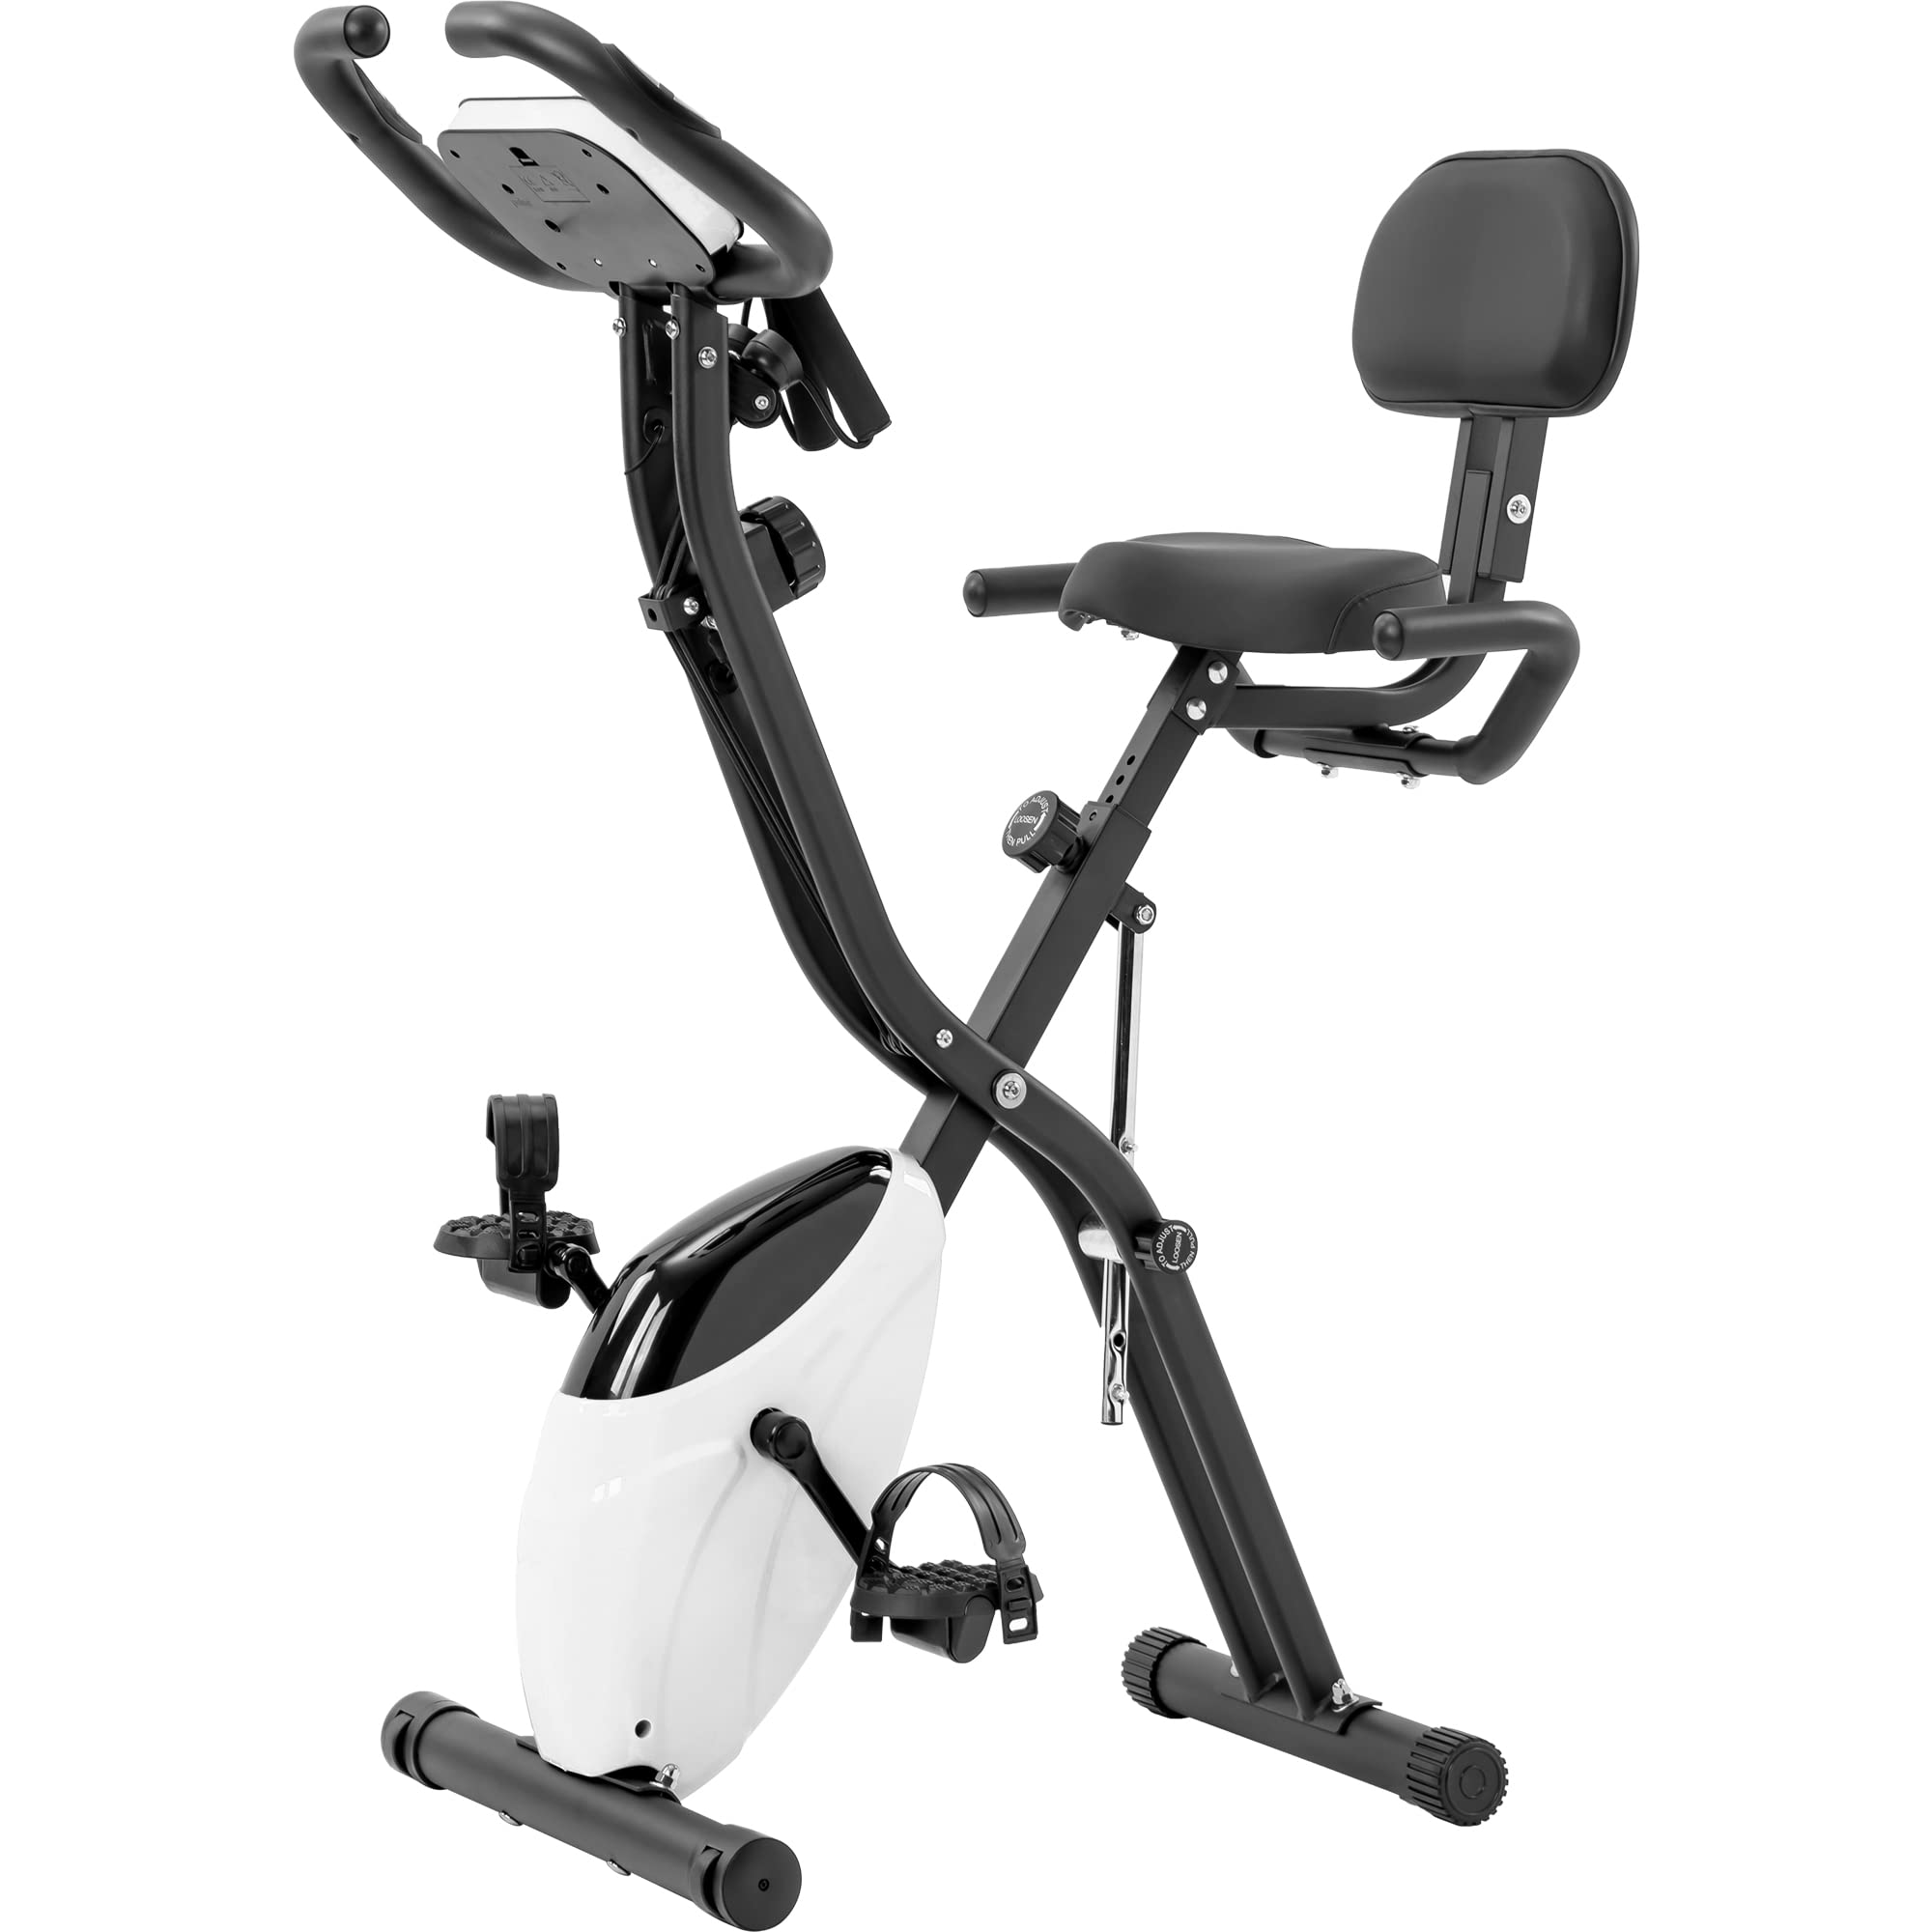 CUAUC Folding Exercise Bike Fitness Upright and Recumbent X-Bike with 10-Level Adjustable Resistance Arm Bands and Backrest